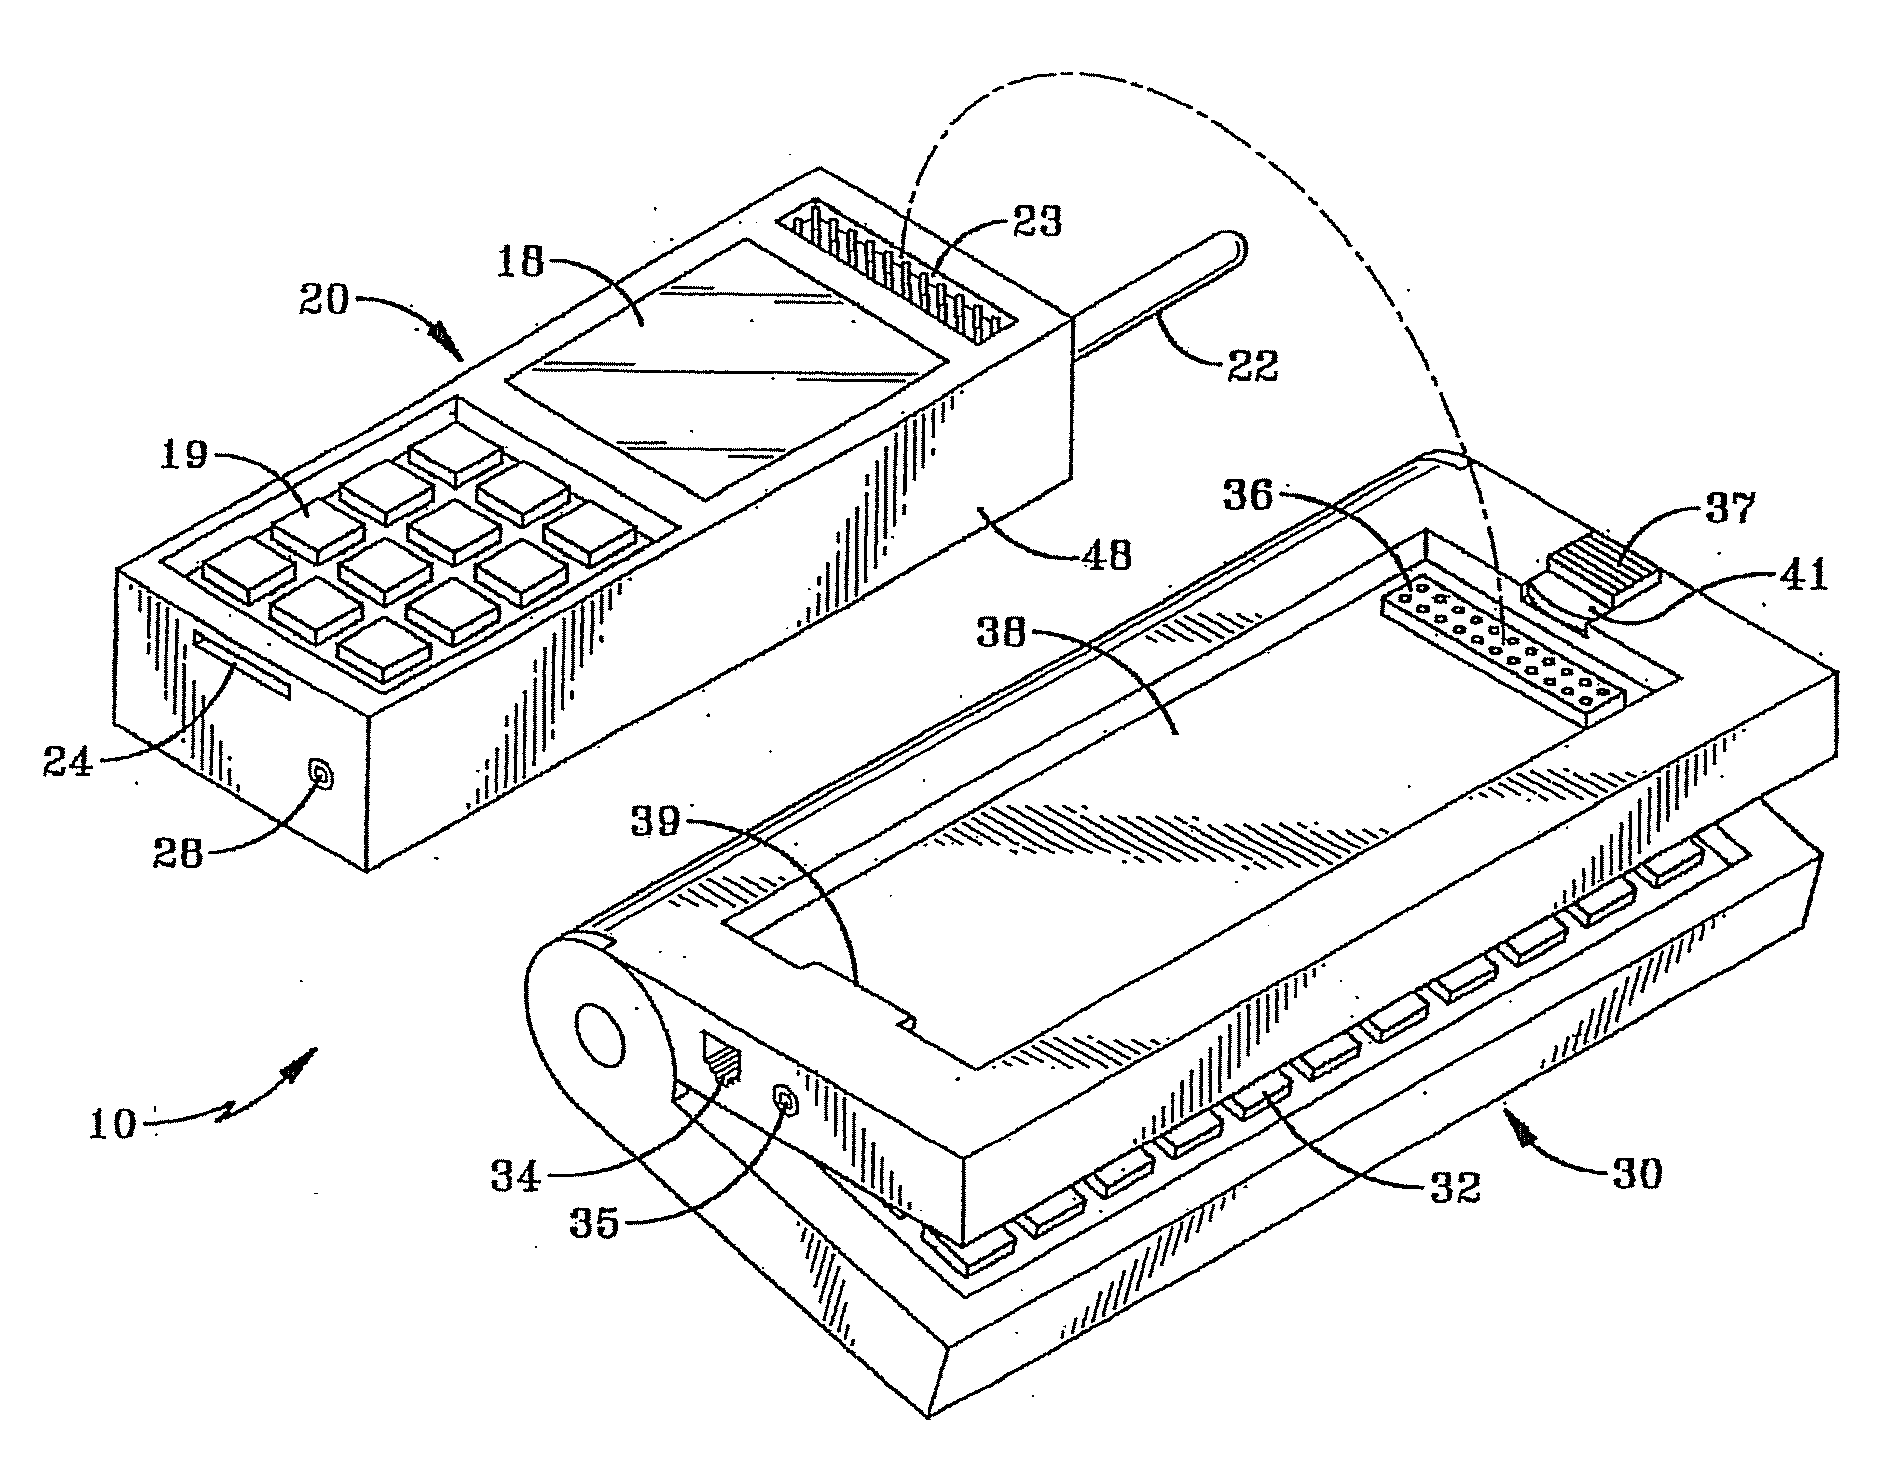 Portable computing, communication and entertainment device with central processor carried in a detachable portable device